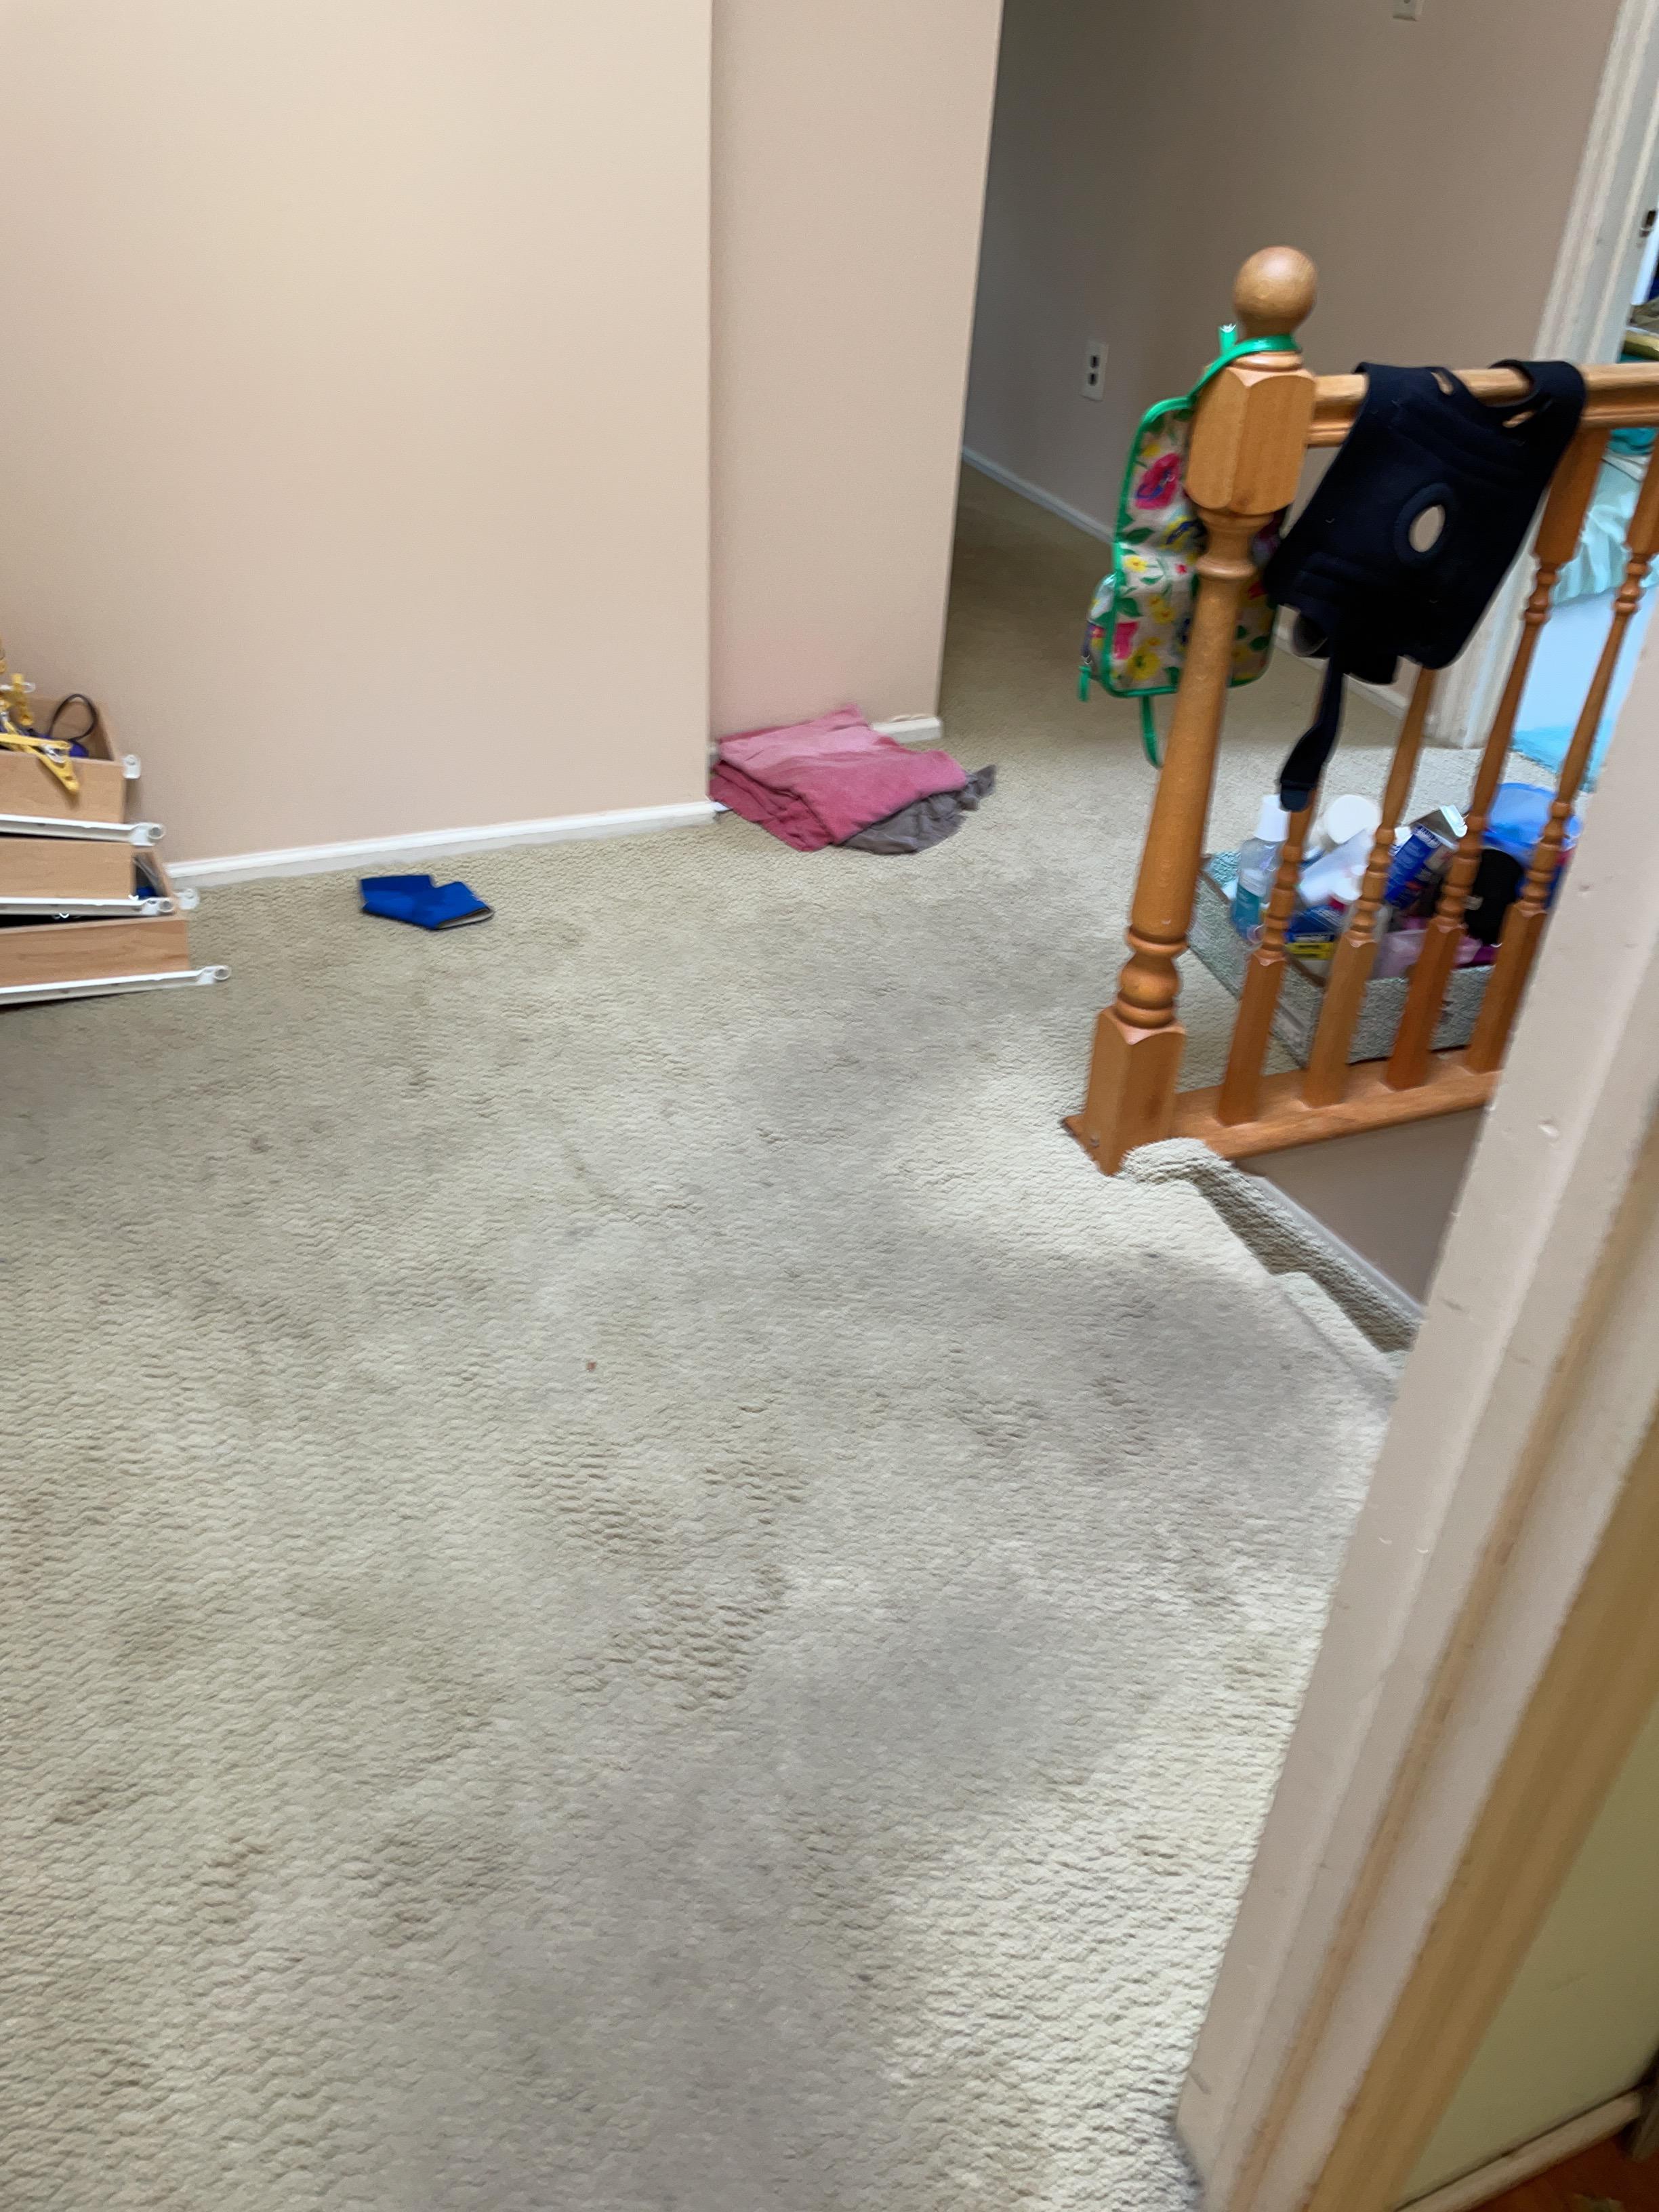 Second floor hallway rug damaged from water.